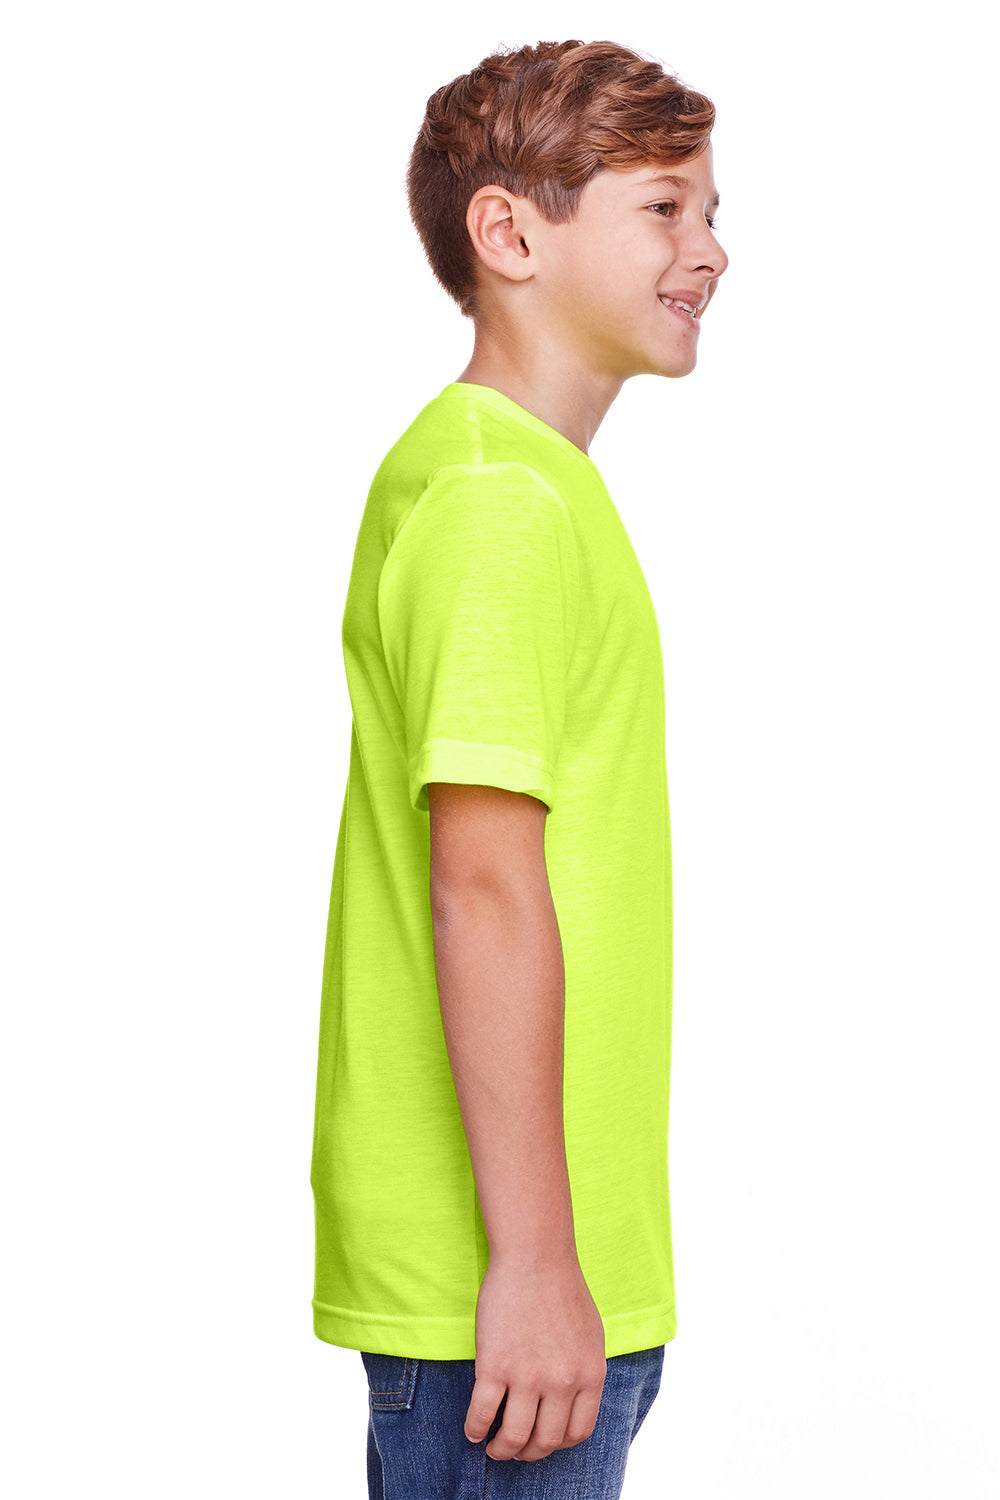 Core 365 CE111Y Youth Fusion ChromaSoft Performance Moisture Wicking Short Sleeve Crewneck T-Shirt Safety Yellow Side